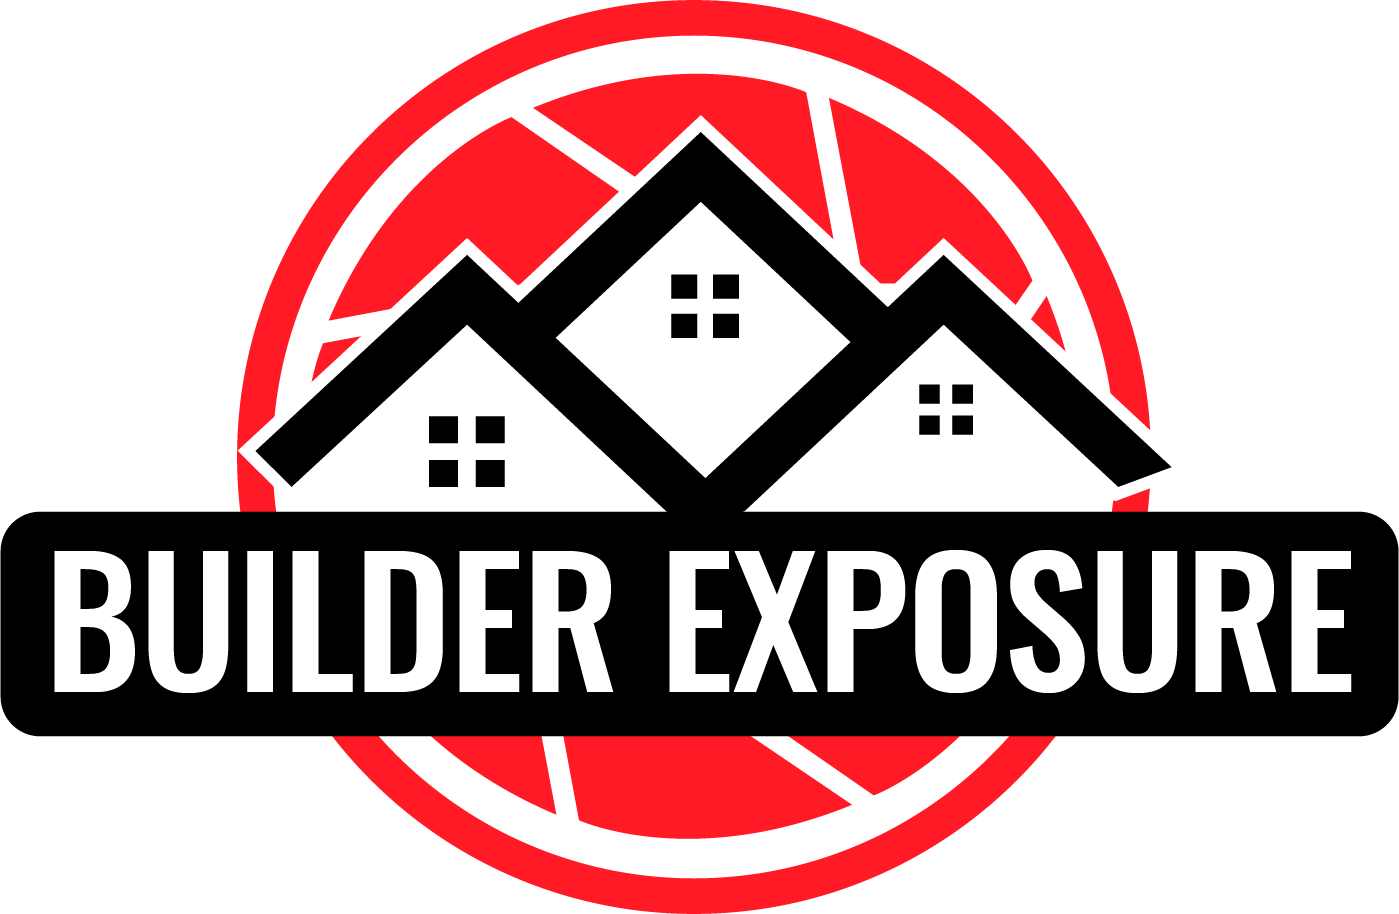 Builder Exposure Provides Model And Inventory / Spec - Builder Exposure Provides Model And Inventory / Spec (1399x914)